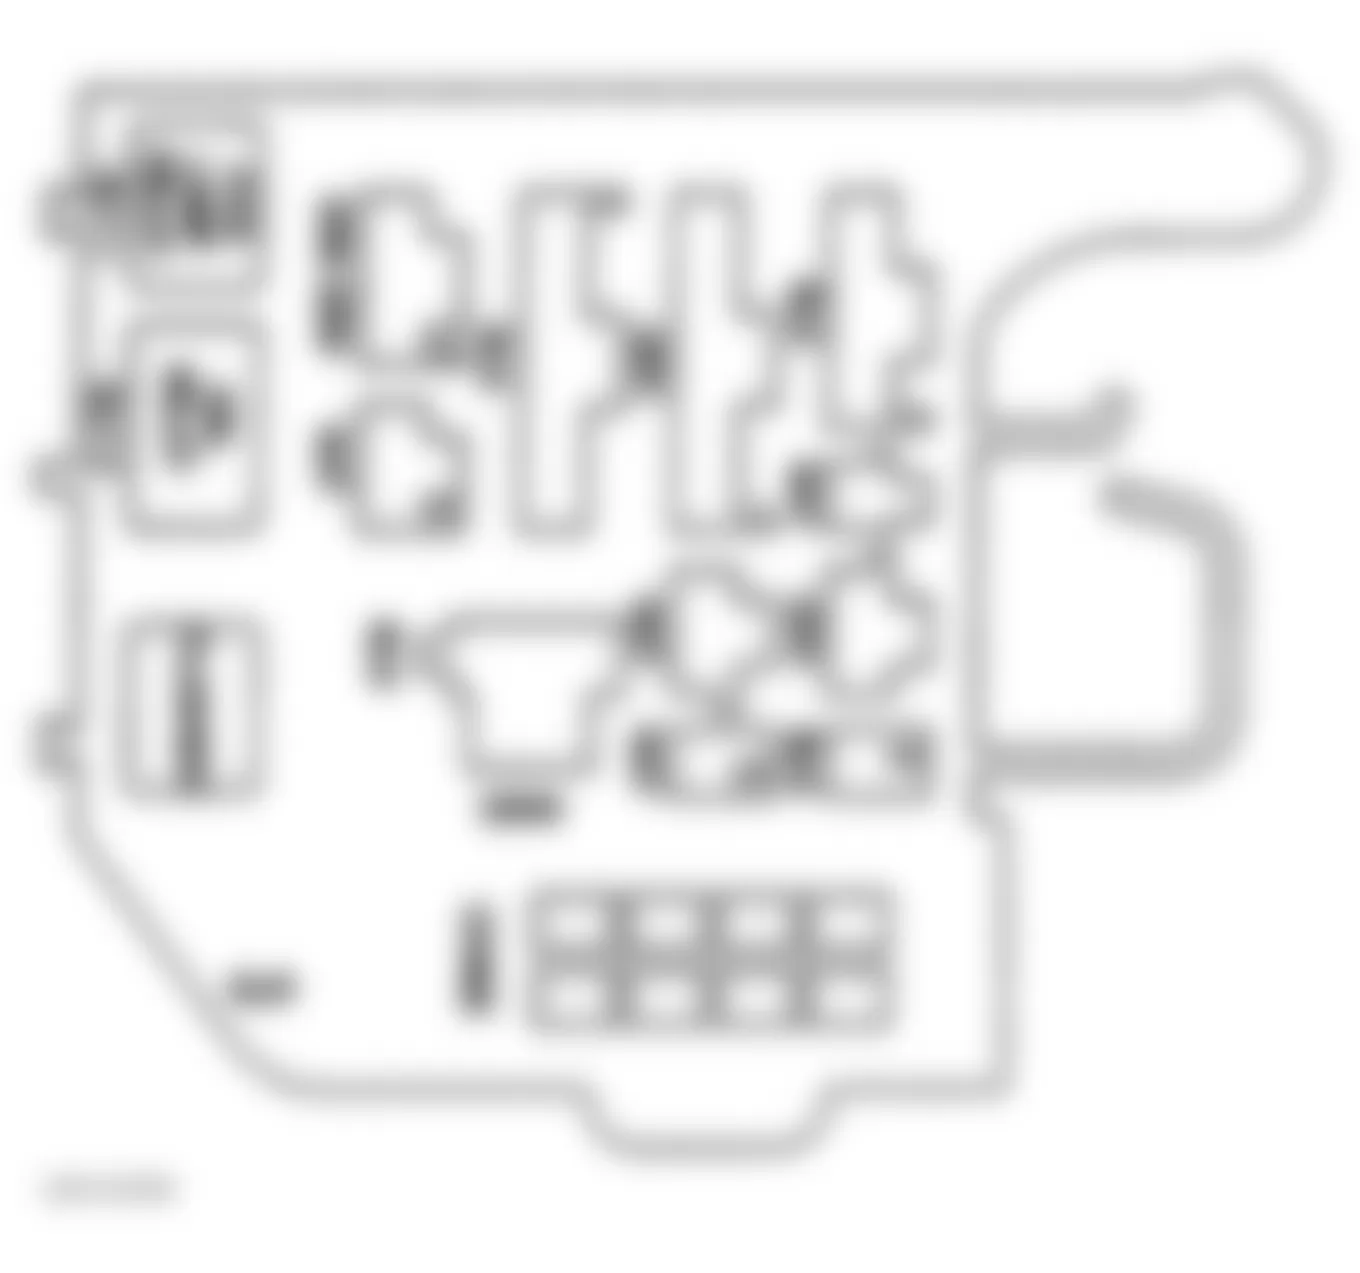 GMC Suburban K2500 1997 - Component Locations -  Identifying Convenience Center Components